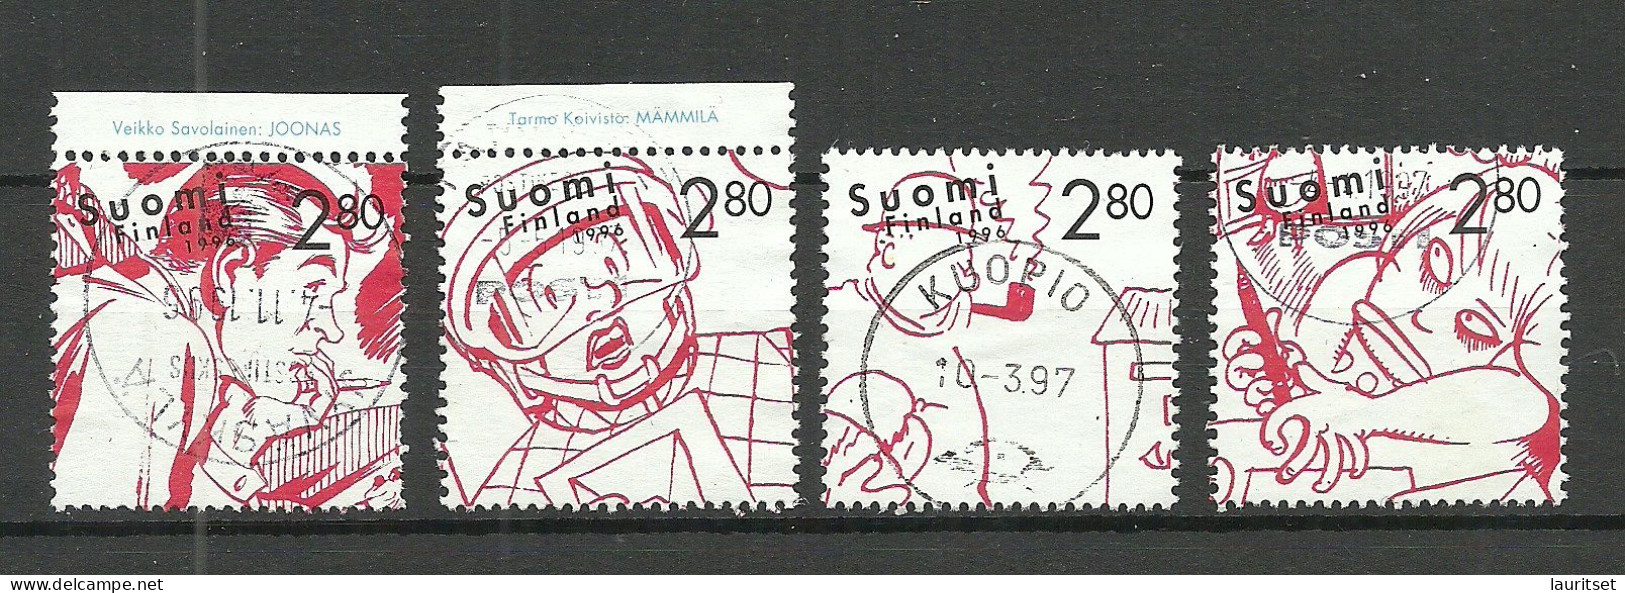 FINNLAND Finland 1996 Michel 1359 - 1360 & 1361 & 1364 O Comics - Used Stamps